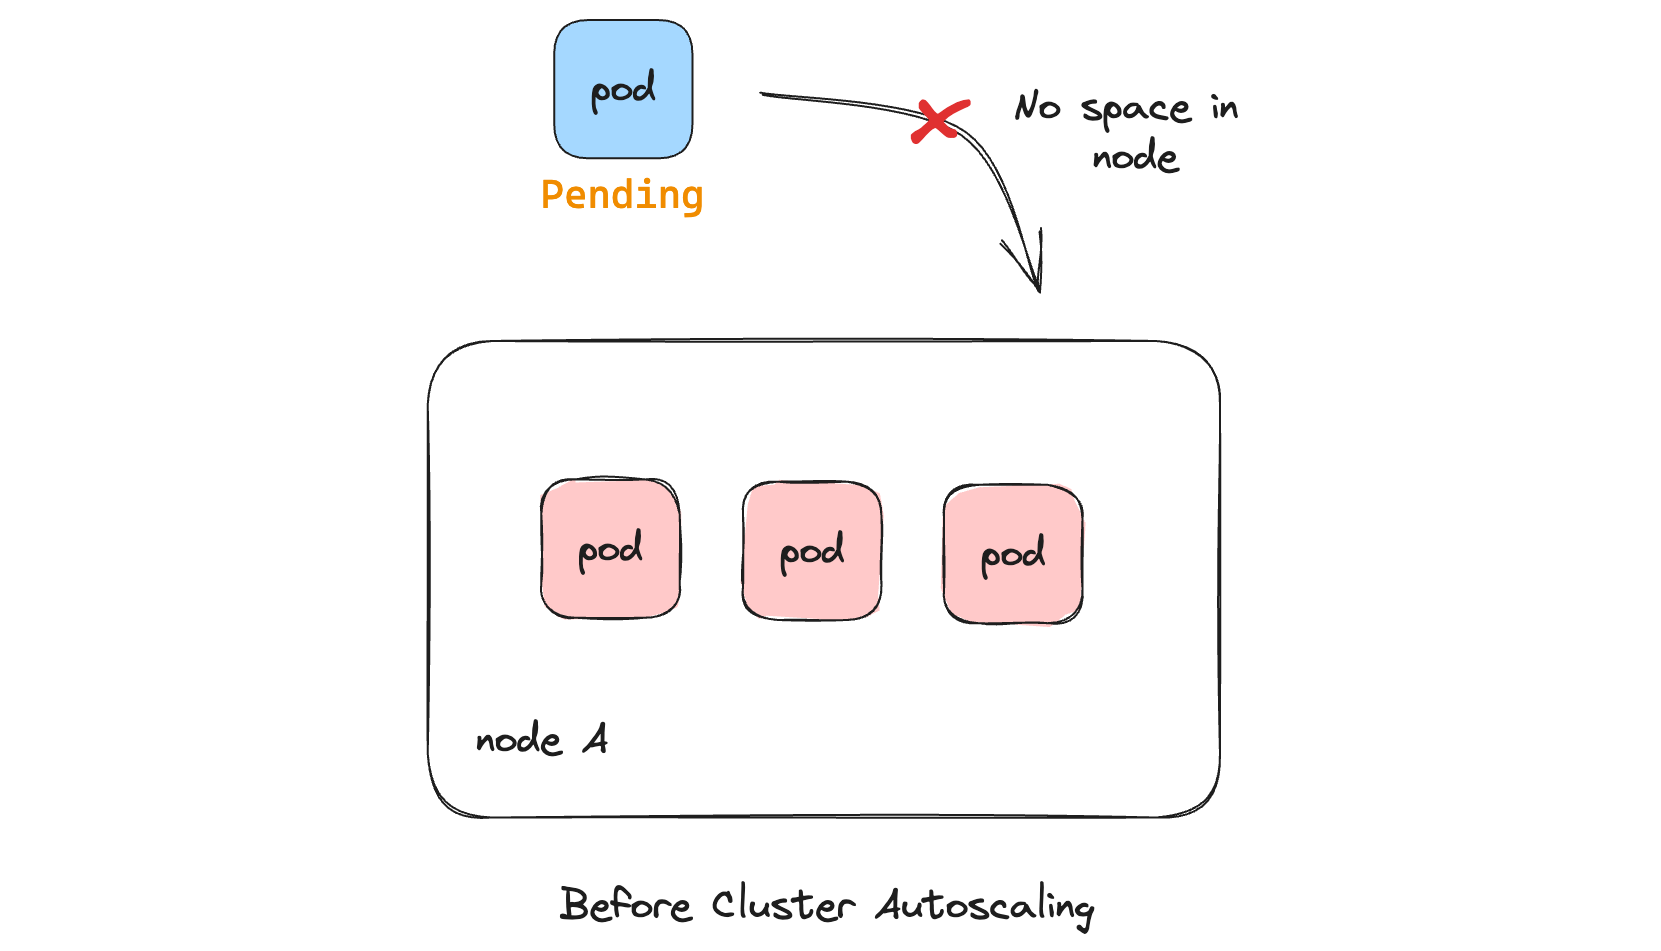 Illustration of pod stuck in pending state